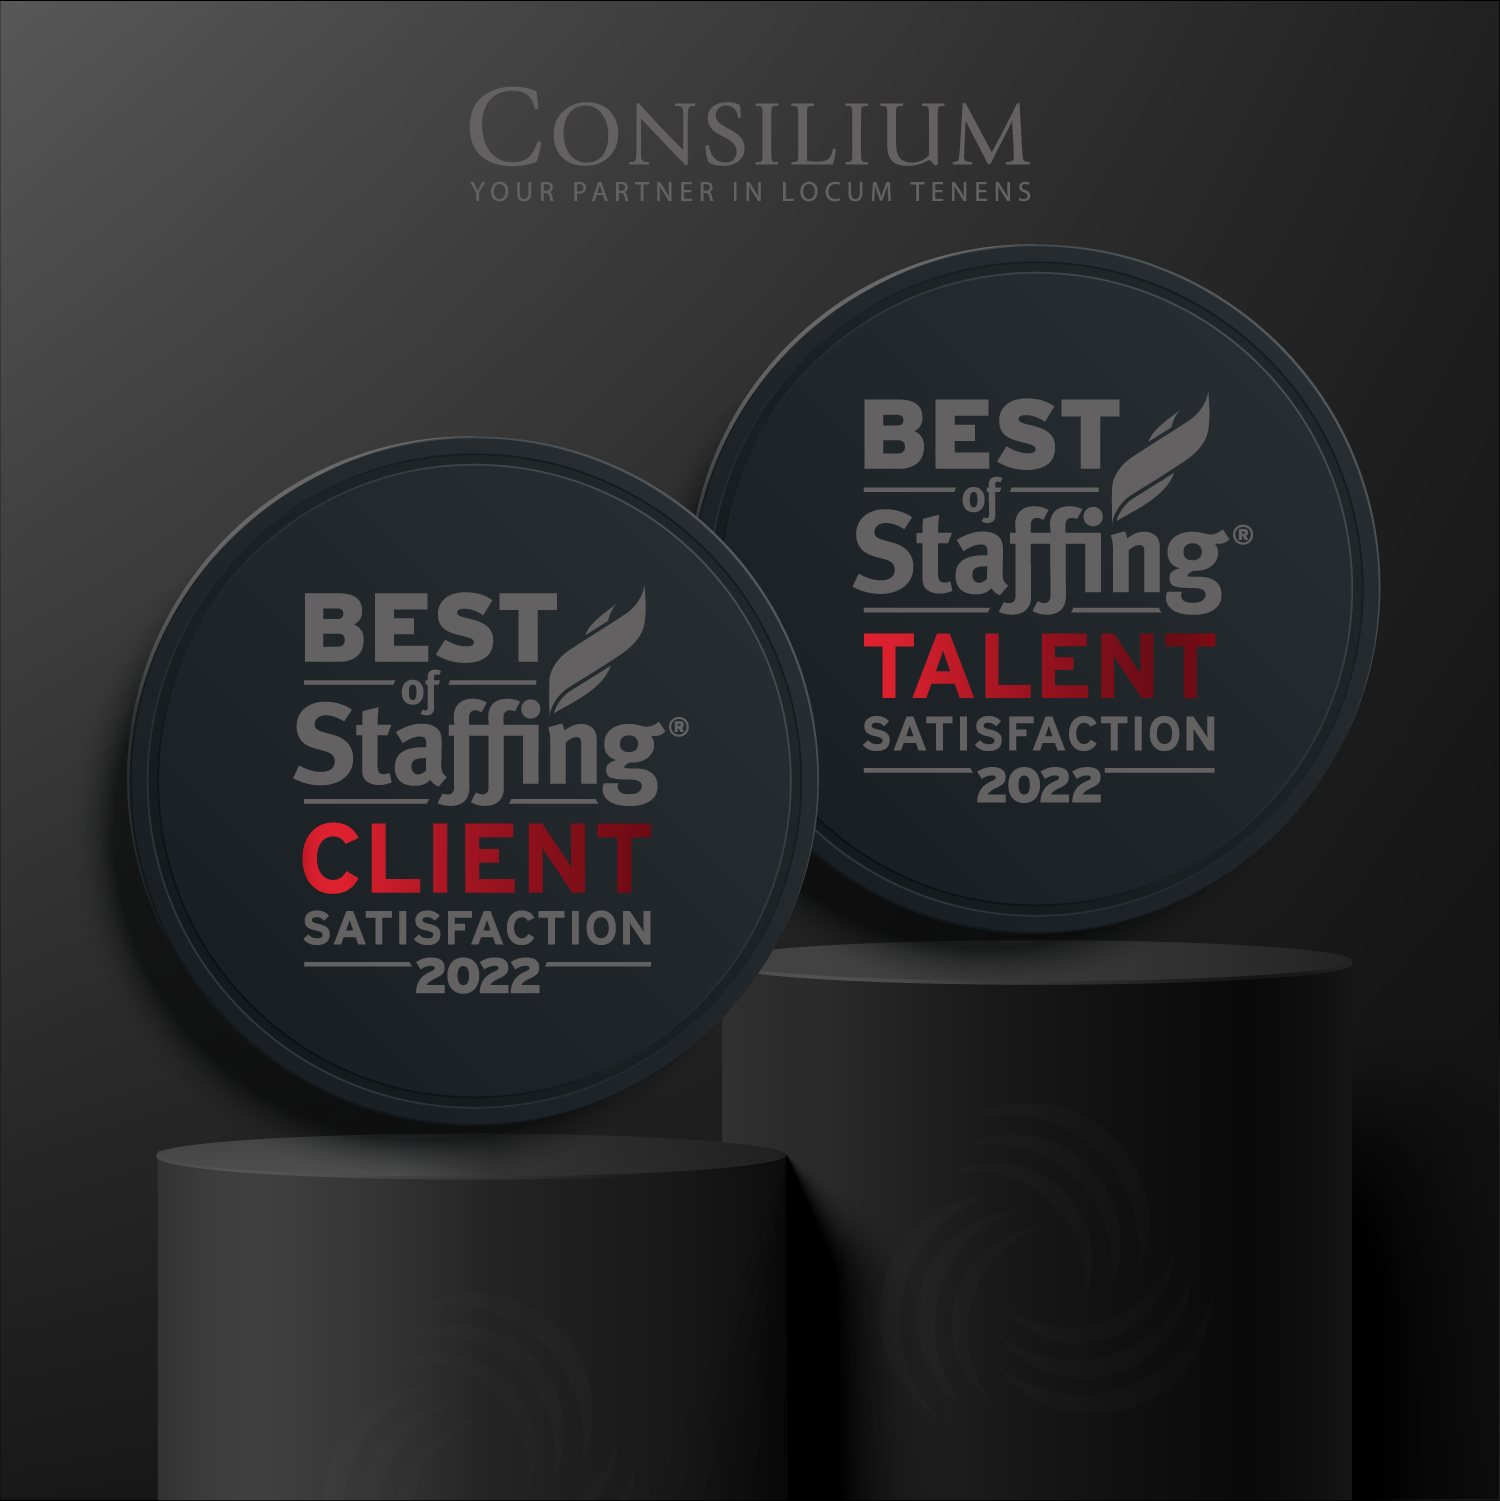 2022 Best of Staffing Awards from Clearly rated